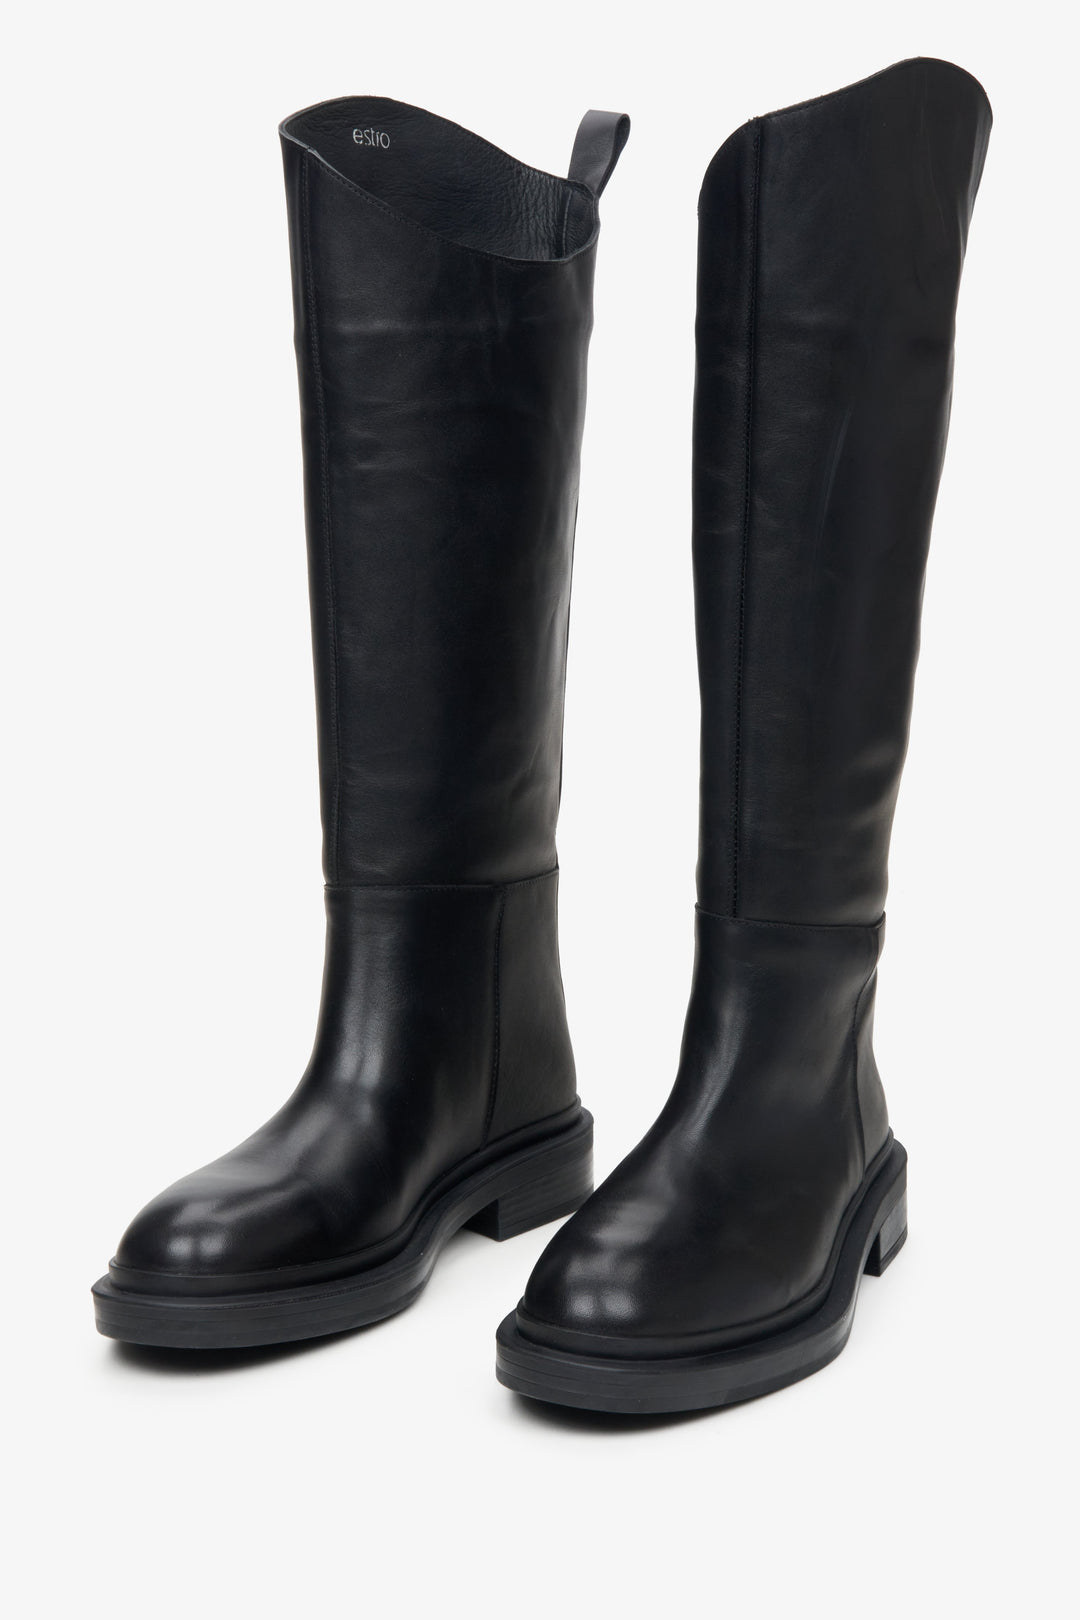 Women's black leather knee-high boots.